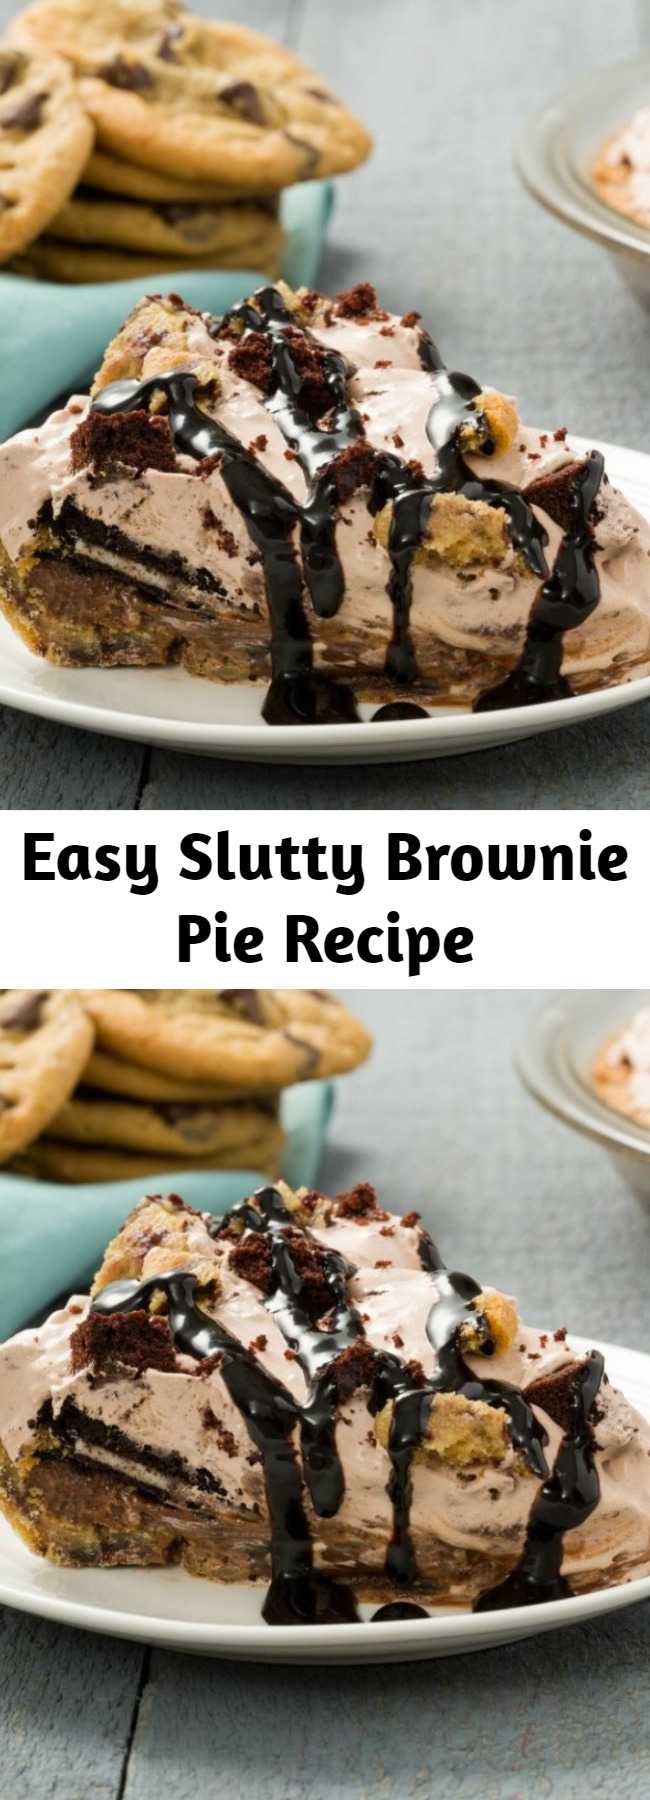 Easy Slutty Brownie Pie Recipe - It's a whole new take on the fudgy dessert that set Pinterest on fire. How can you go wrong with a pie crust made out of chocolate chip cookie dough?